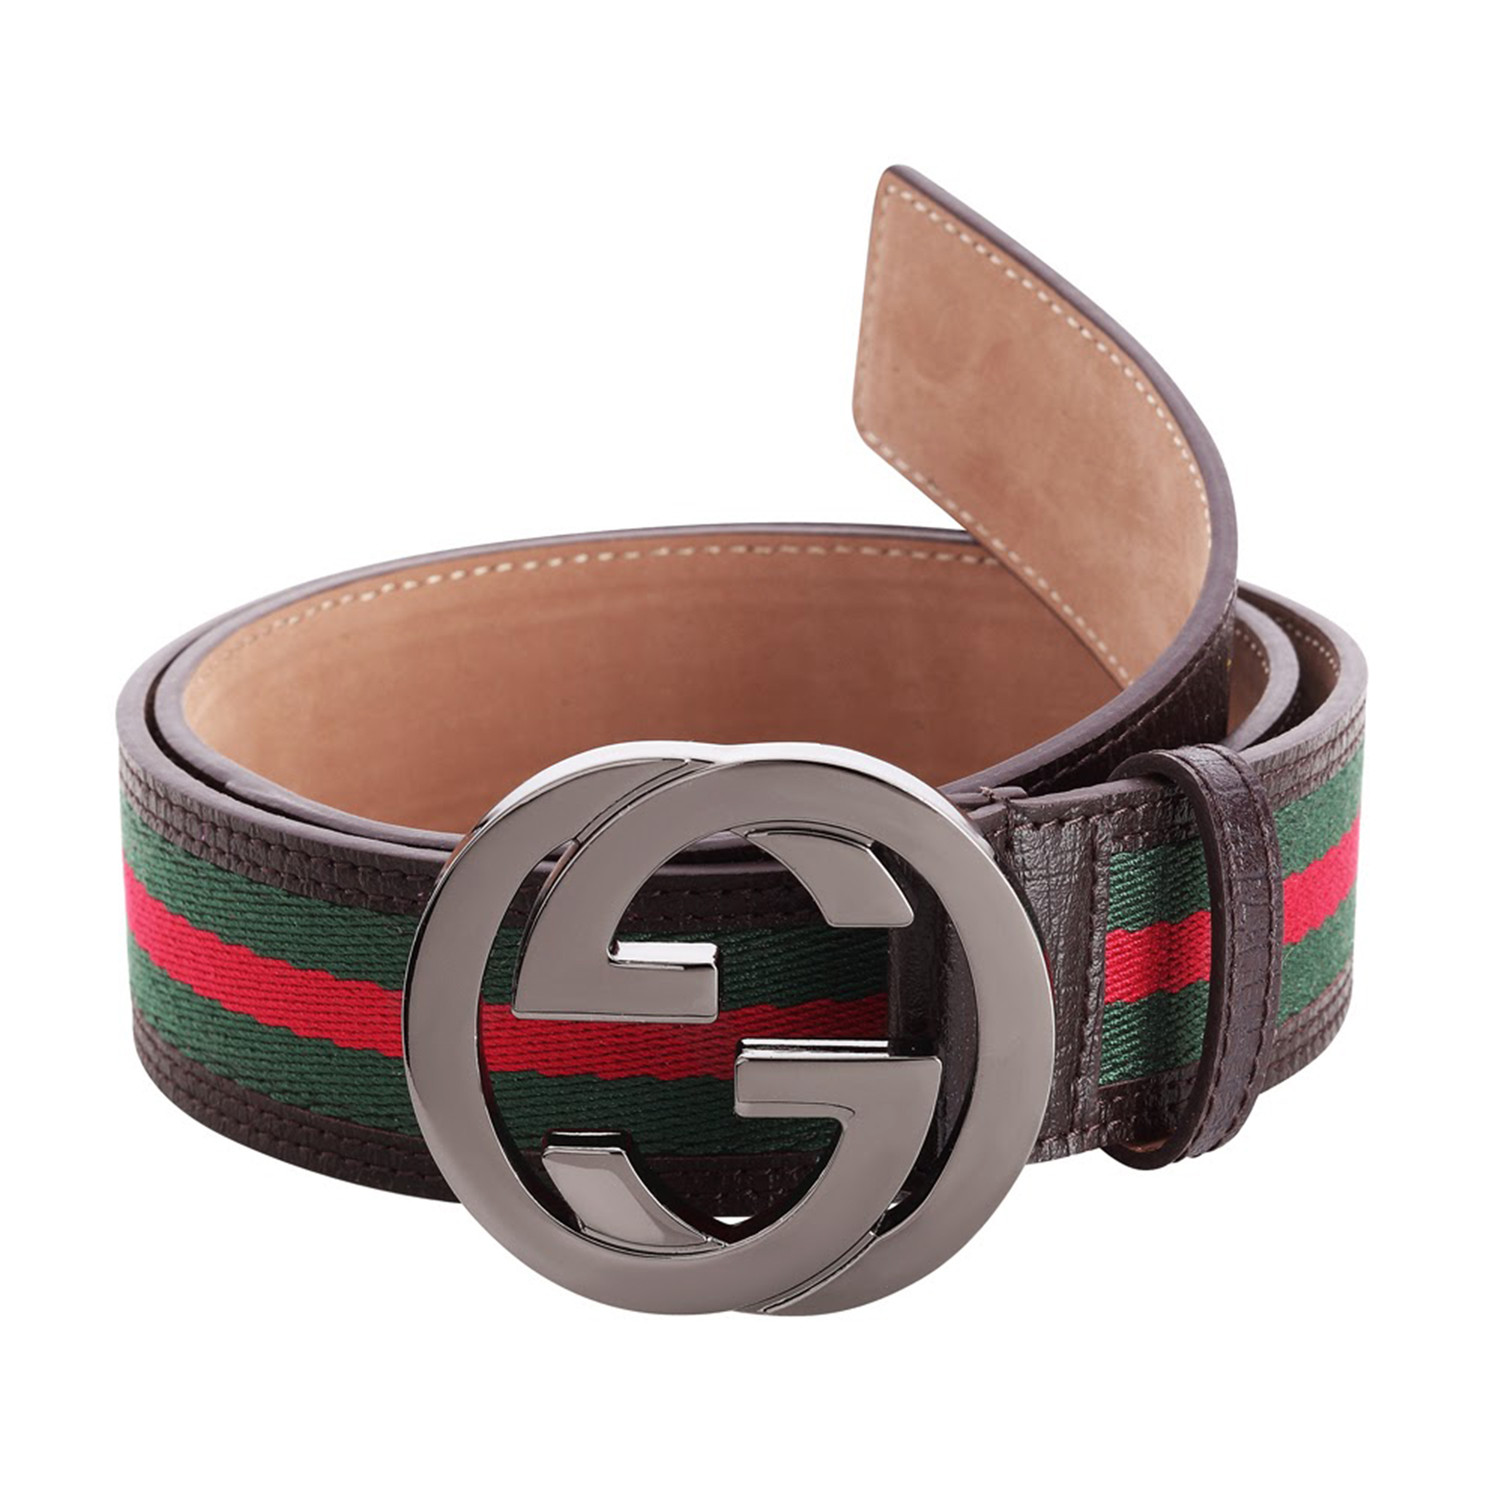 gucci belt with stripes, OFF 79%,www 